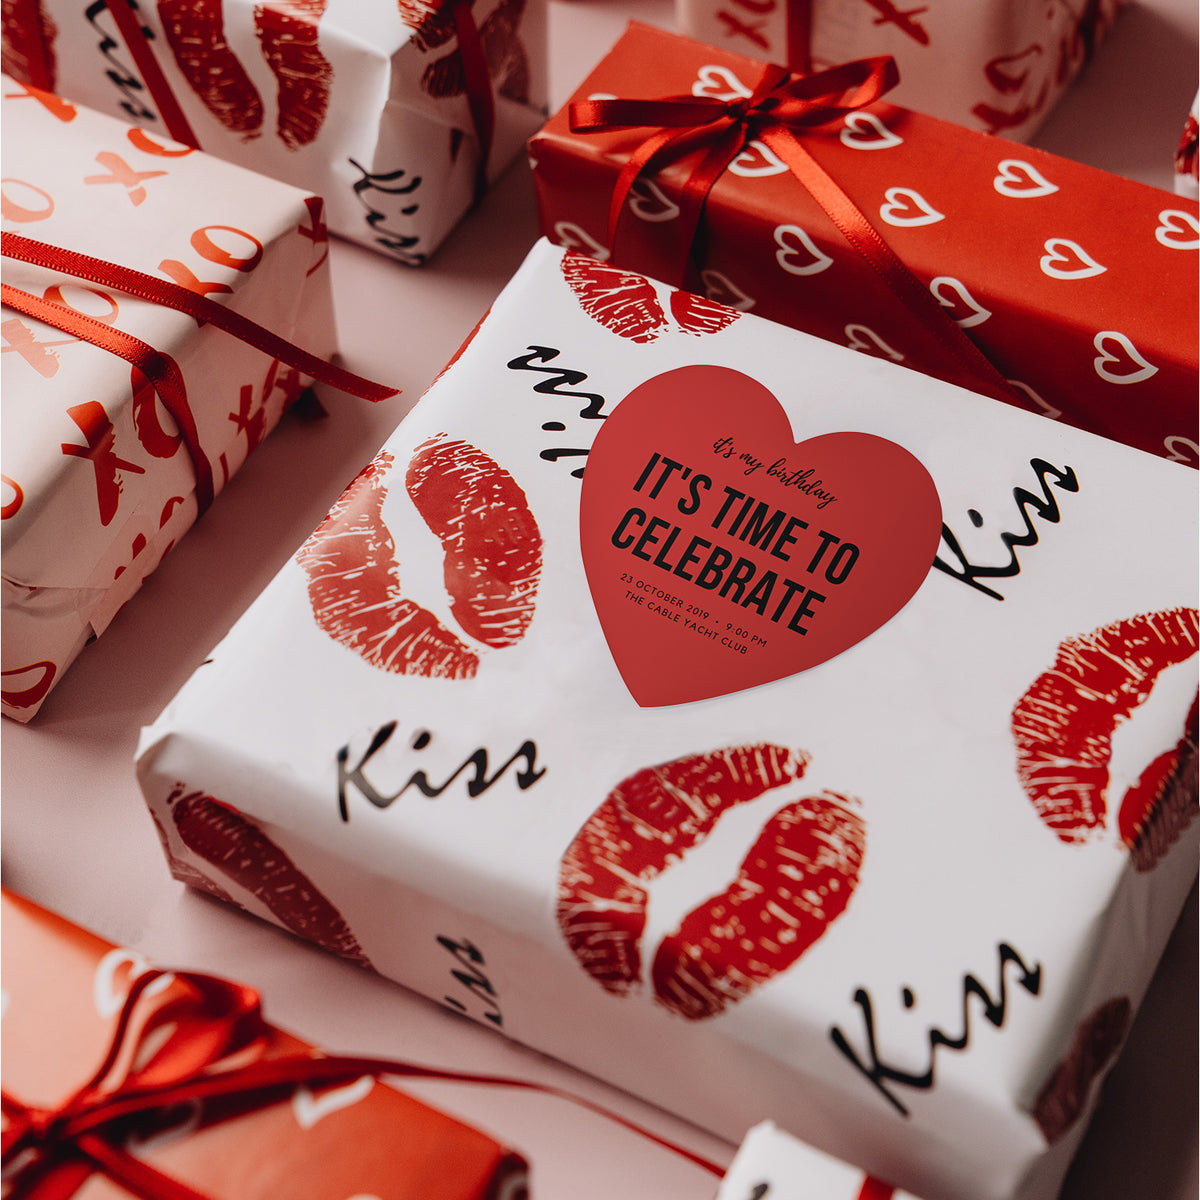 MUNBYN heart-shaped thermal labels are suitable for various occasions, such as Valentine's Day, birthdays, anniversaries, weddings, and more.